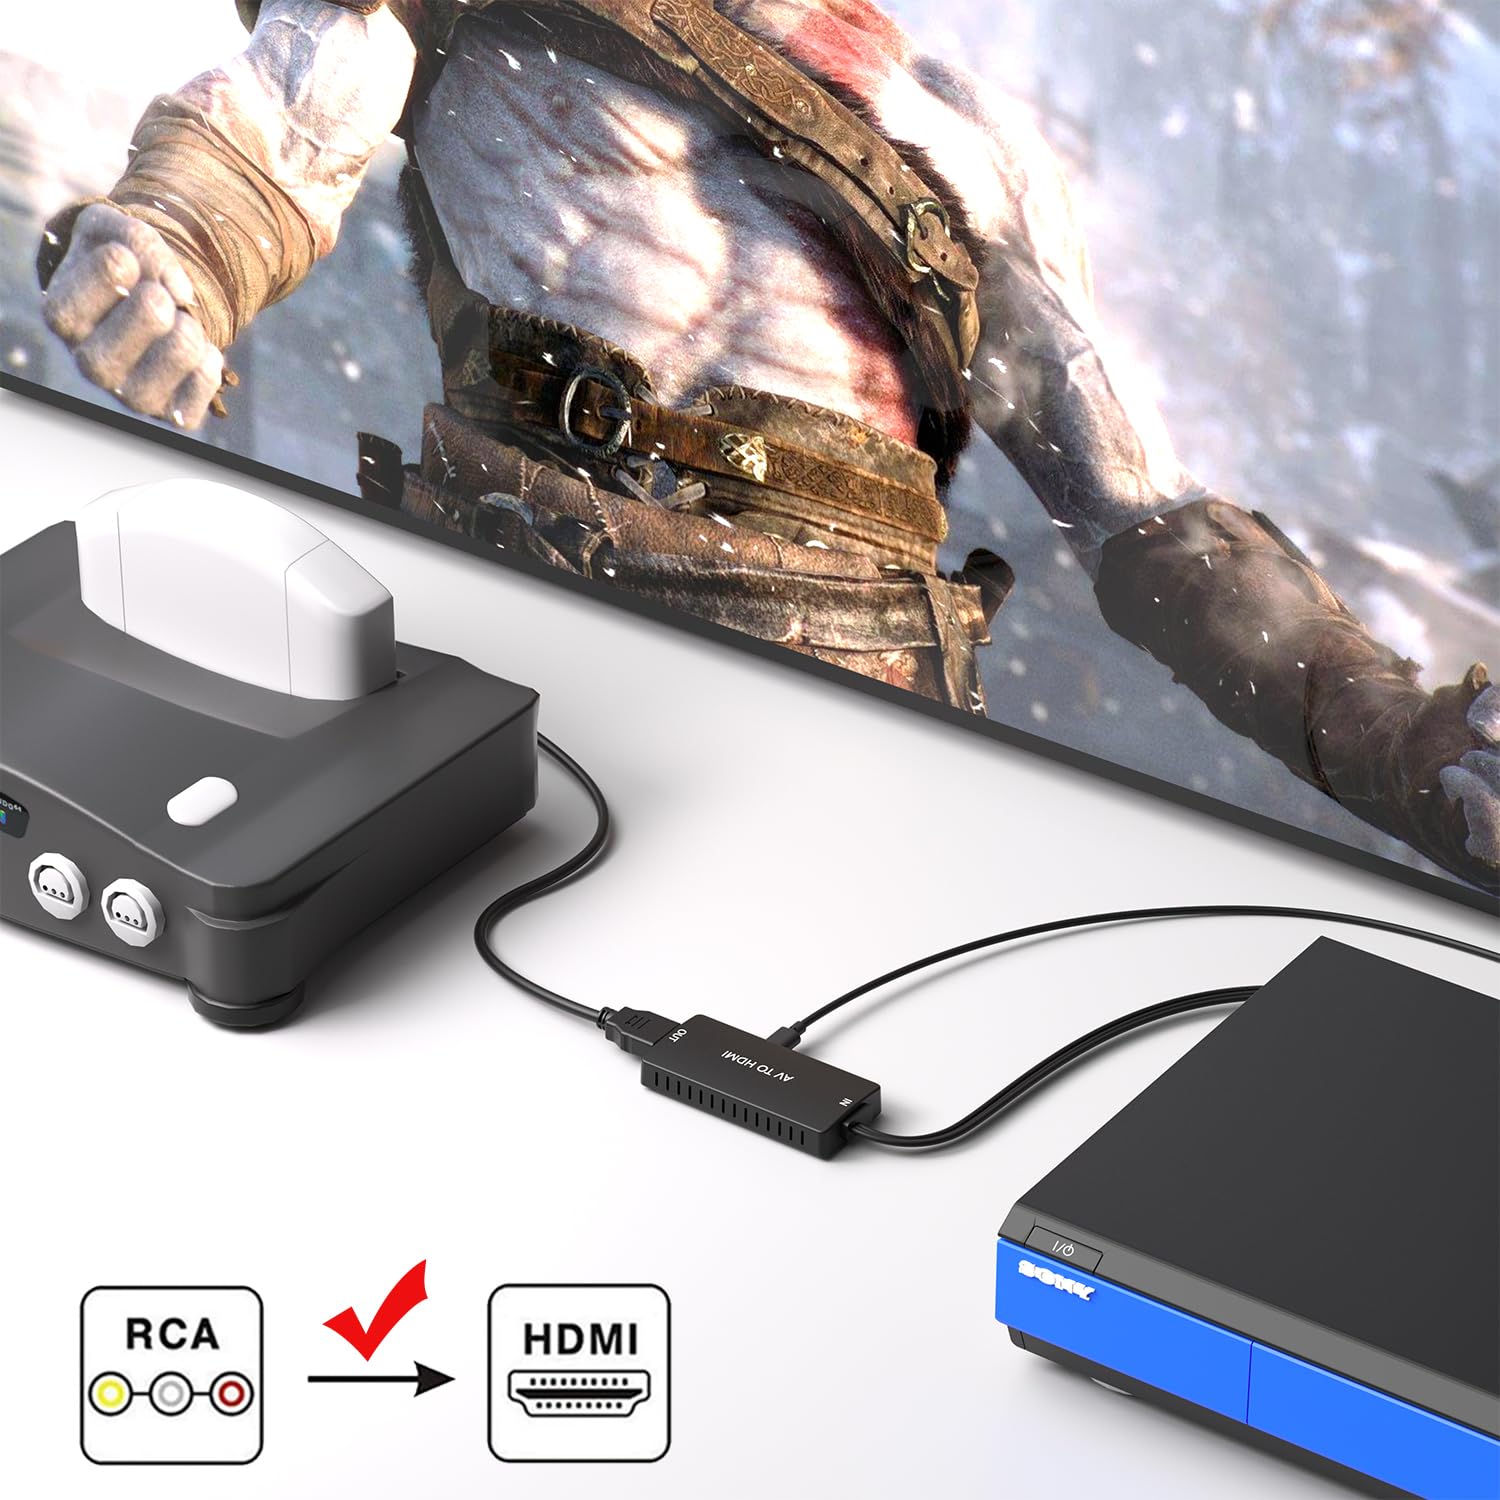 Dingsun RCA to HDMI Converter, AV to HDMI Adapter, Composite/CVBS/Video Audio Converter Support 1080P/720P for HD TV/Display/Projector/PS2/PS3/N64/Wii/STB/VHS/VCR/DVD/Blue-Ray Players etc.